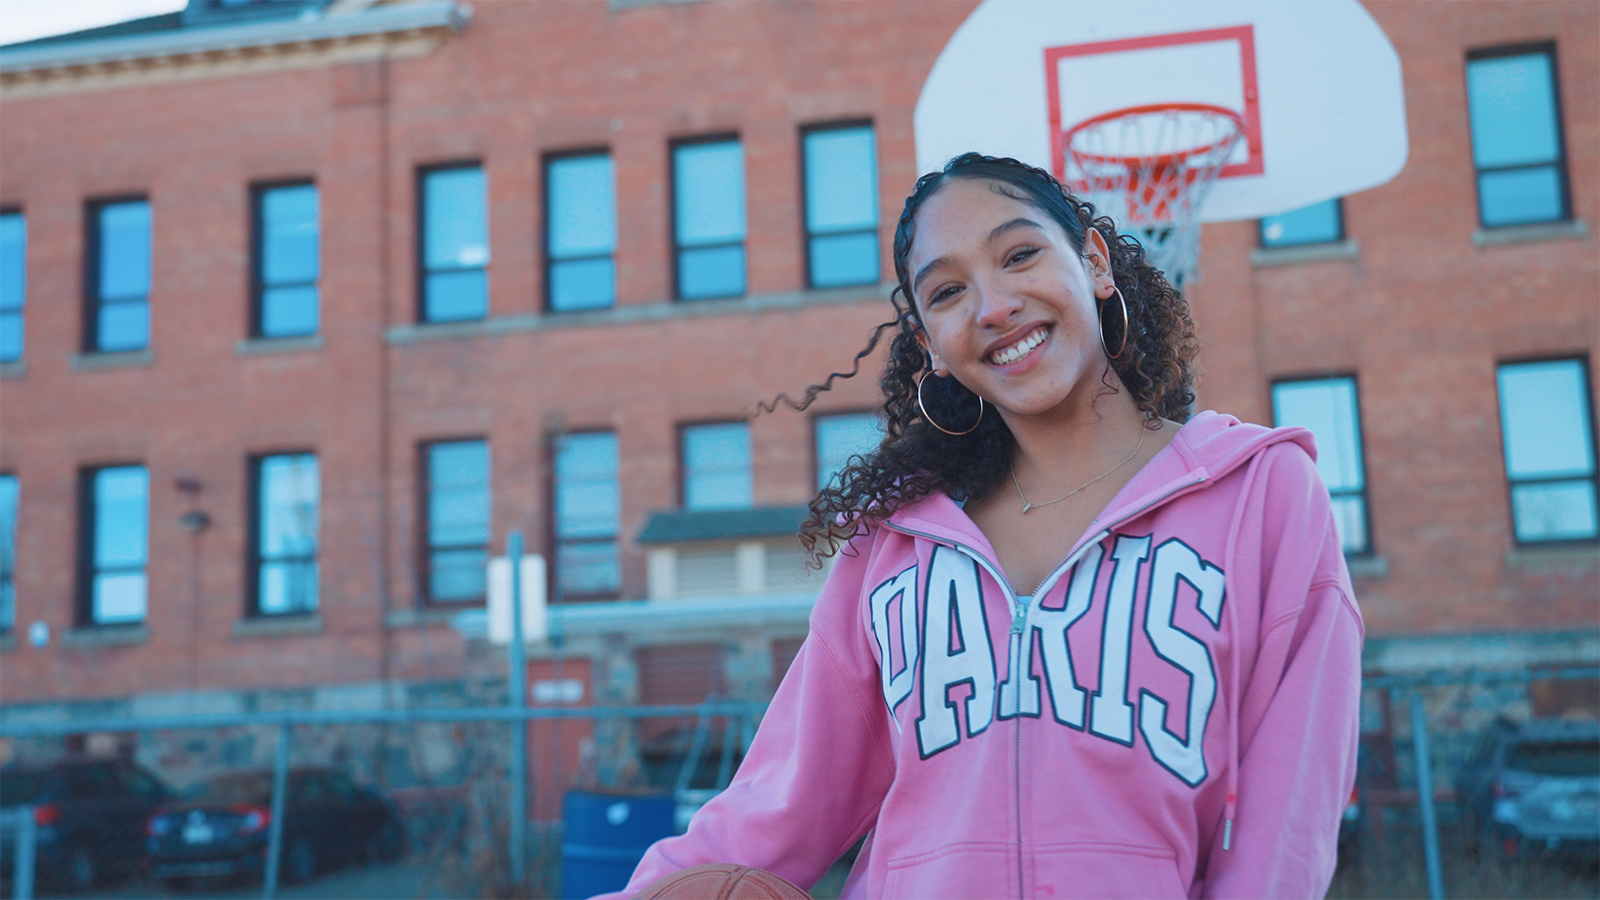 Lasiya shares how All in for Youth is there to support her educational journey, as well as her social and mental wellness and eliminate barriers.